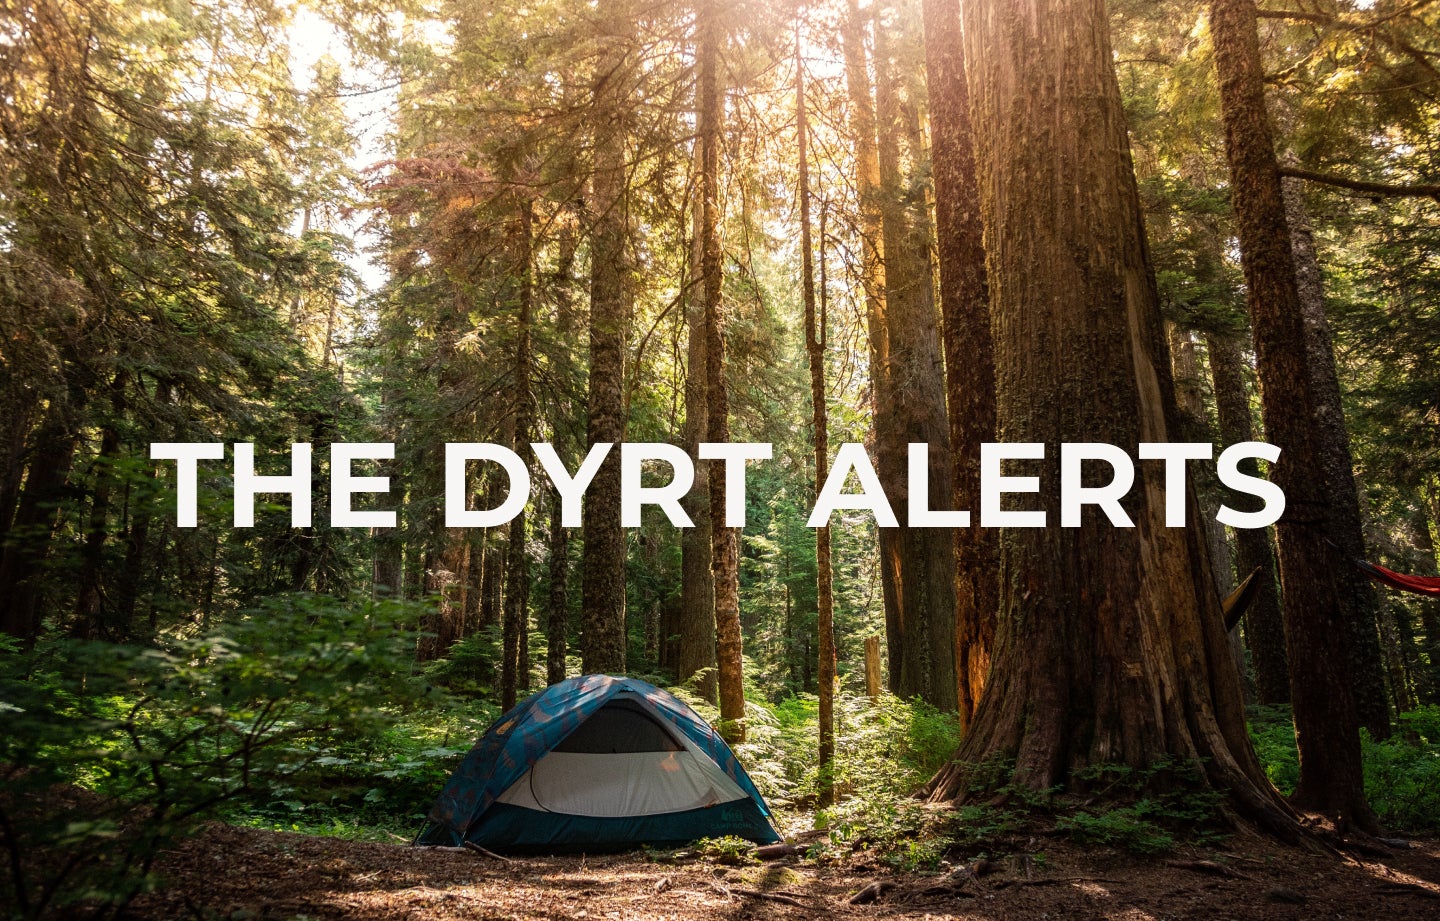 Which sold-out campgrounds can you scan for cancellations using The Dyrt Alerts?